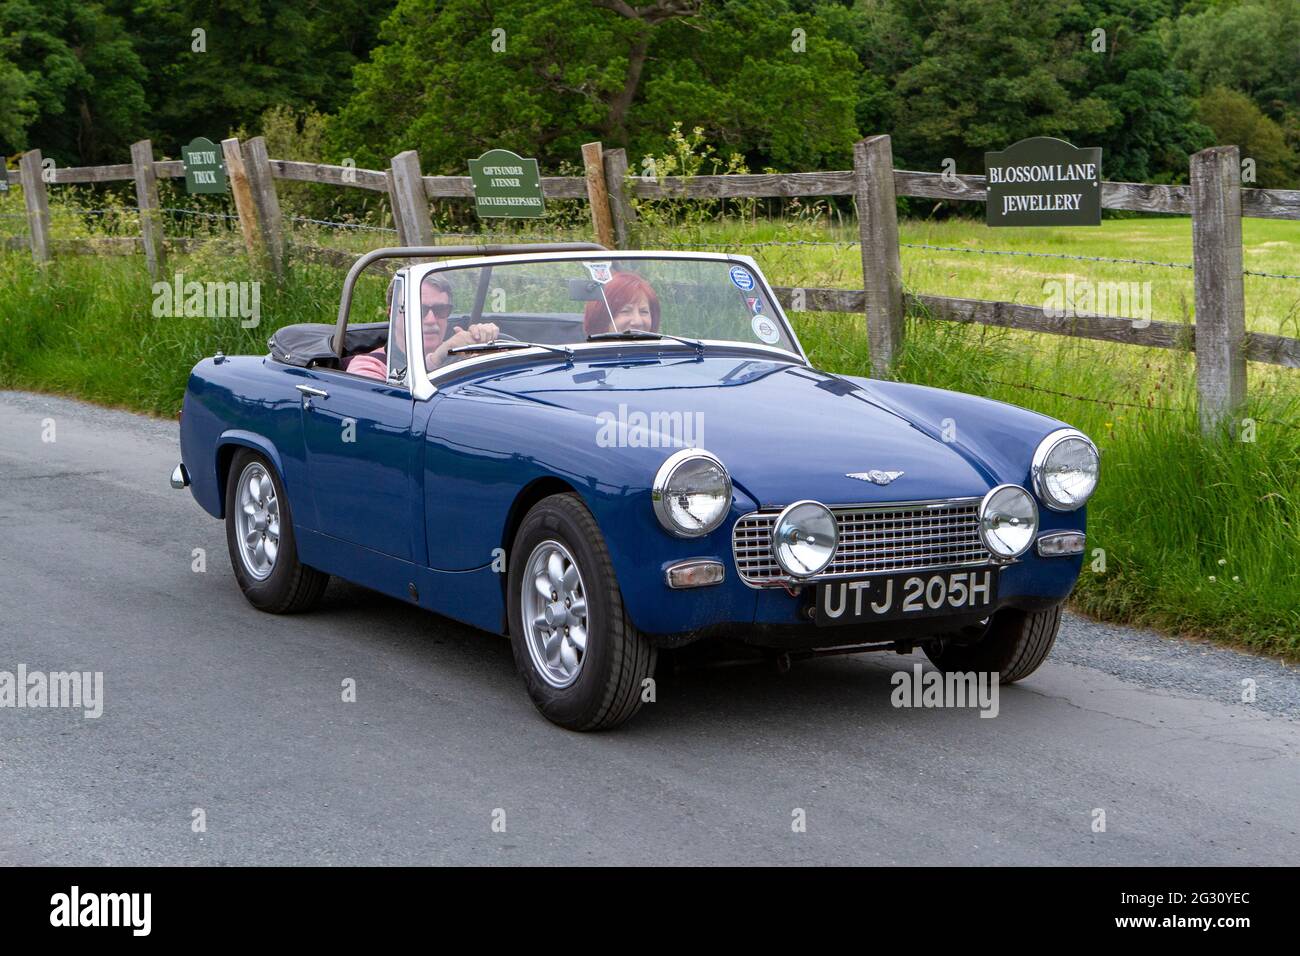 1970 70s blue Austin Healey Sprite 1275cc petrol at the 58th Annual Manchester to Blackpool Vintage & Classic Car Run event a ‘Touring Assembly’ Stock Photo